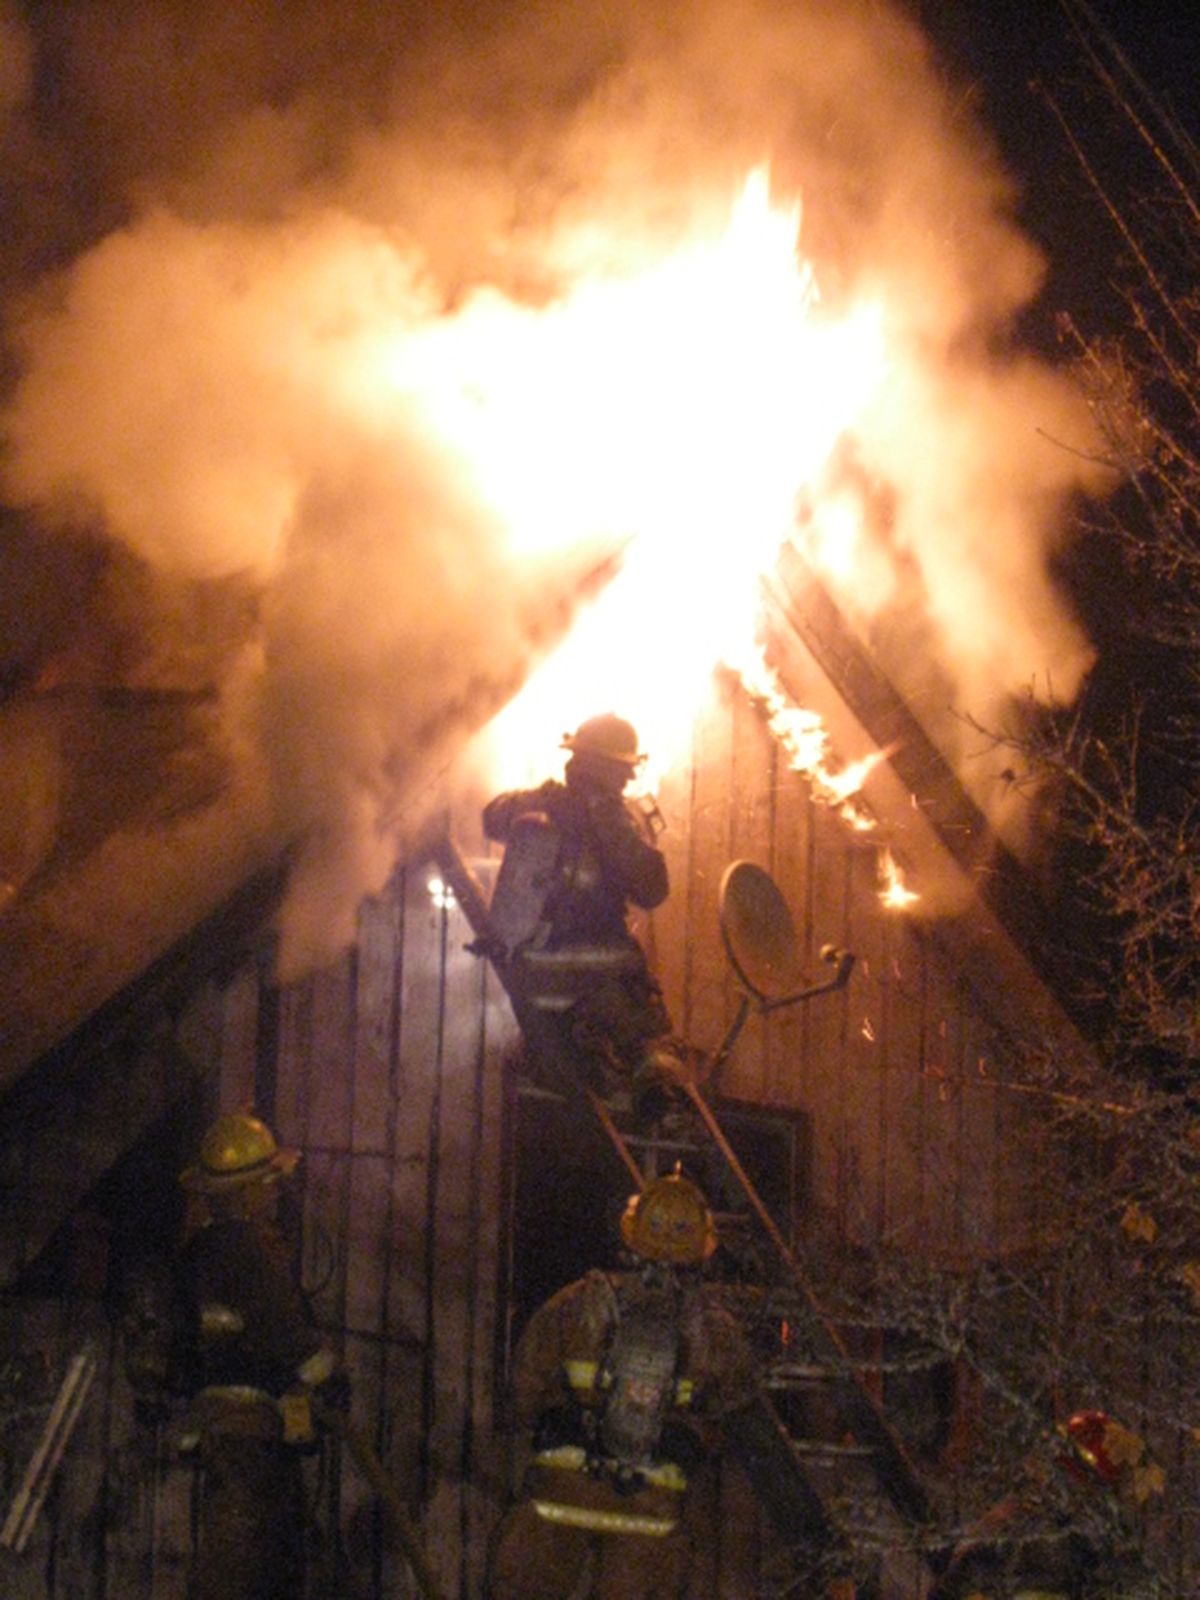 A chimney fire ripped through the roof of the home at 8407 E. Knox Ave. just after 4 a.m. on Oct. 28, 2009, displacing three adults and two children and causing more than $200,000 in damage.  (Spokane Valley Fire Department)